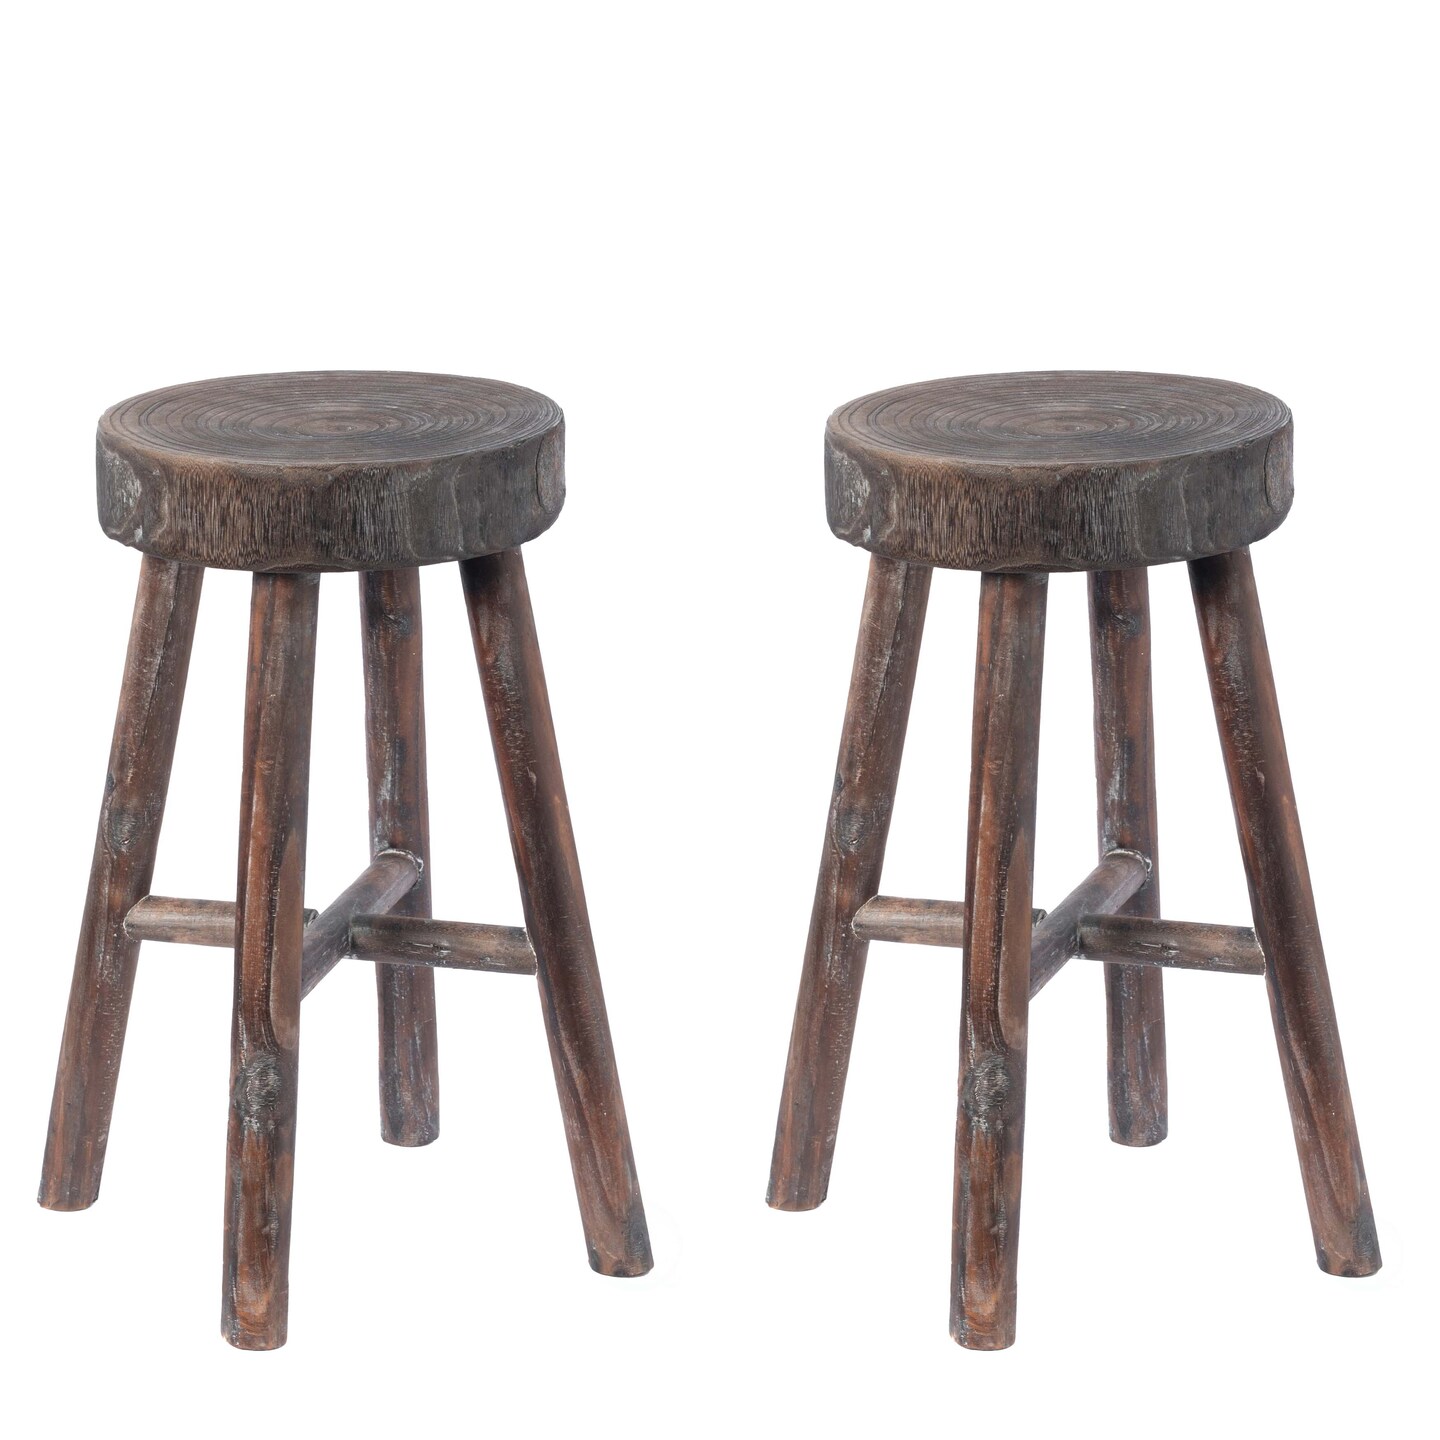 Antique Round Wooden Chair Log Cabin Stools Set of 2